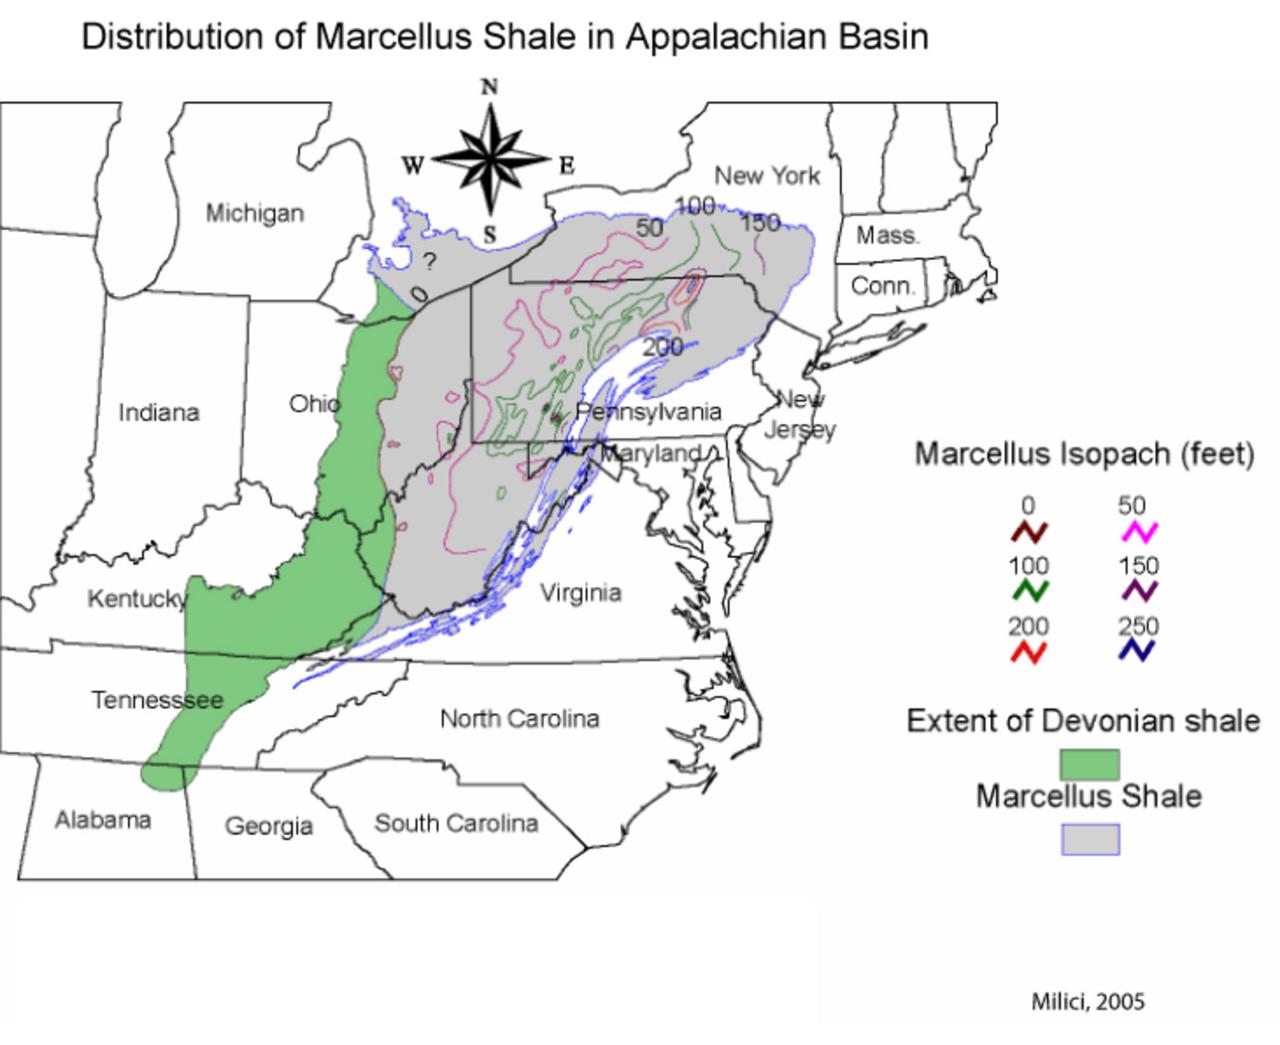 Distribution of Marcellus shale in the Appalachian Basin – a play that has industry analysts, operators and observers all abuzz.<br><em>Graphic courtesy of Milici (2005)</em>